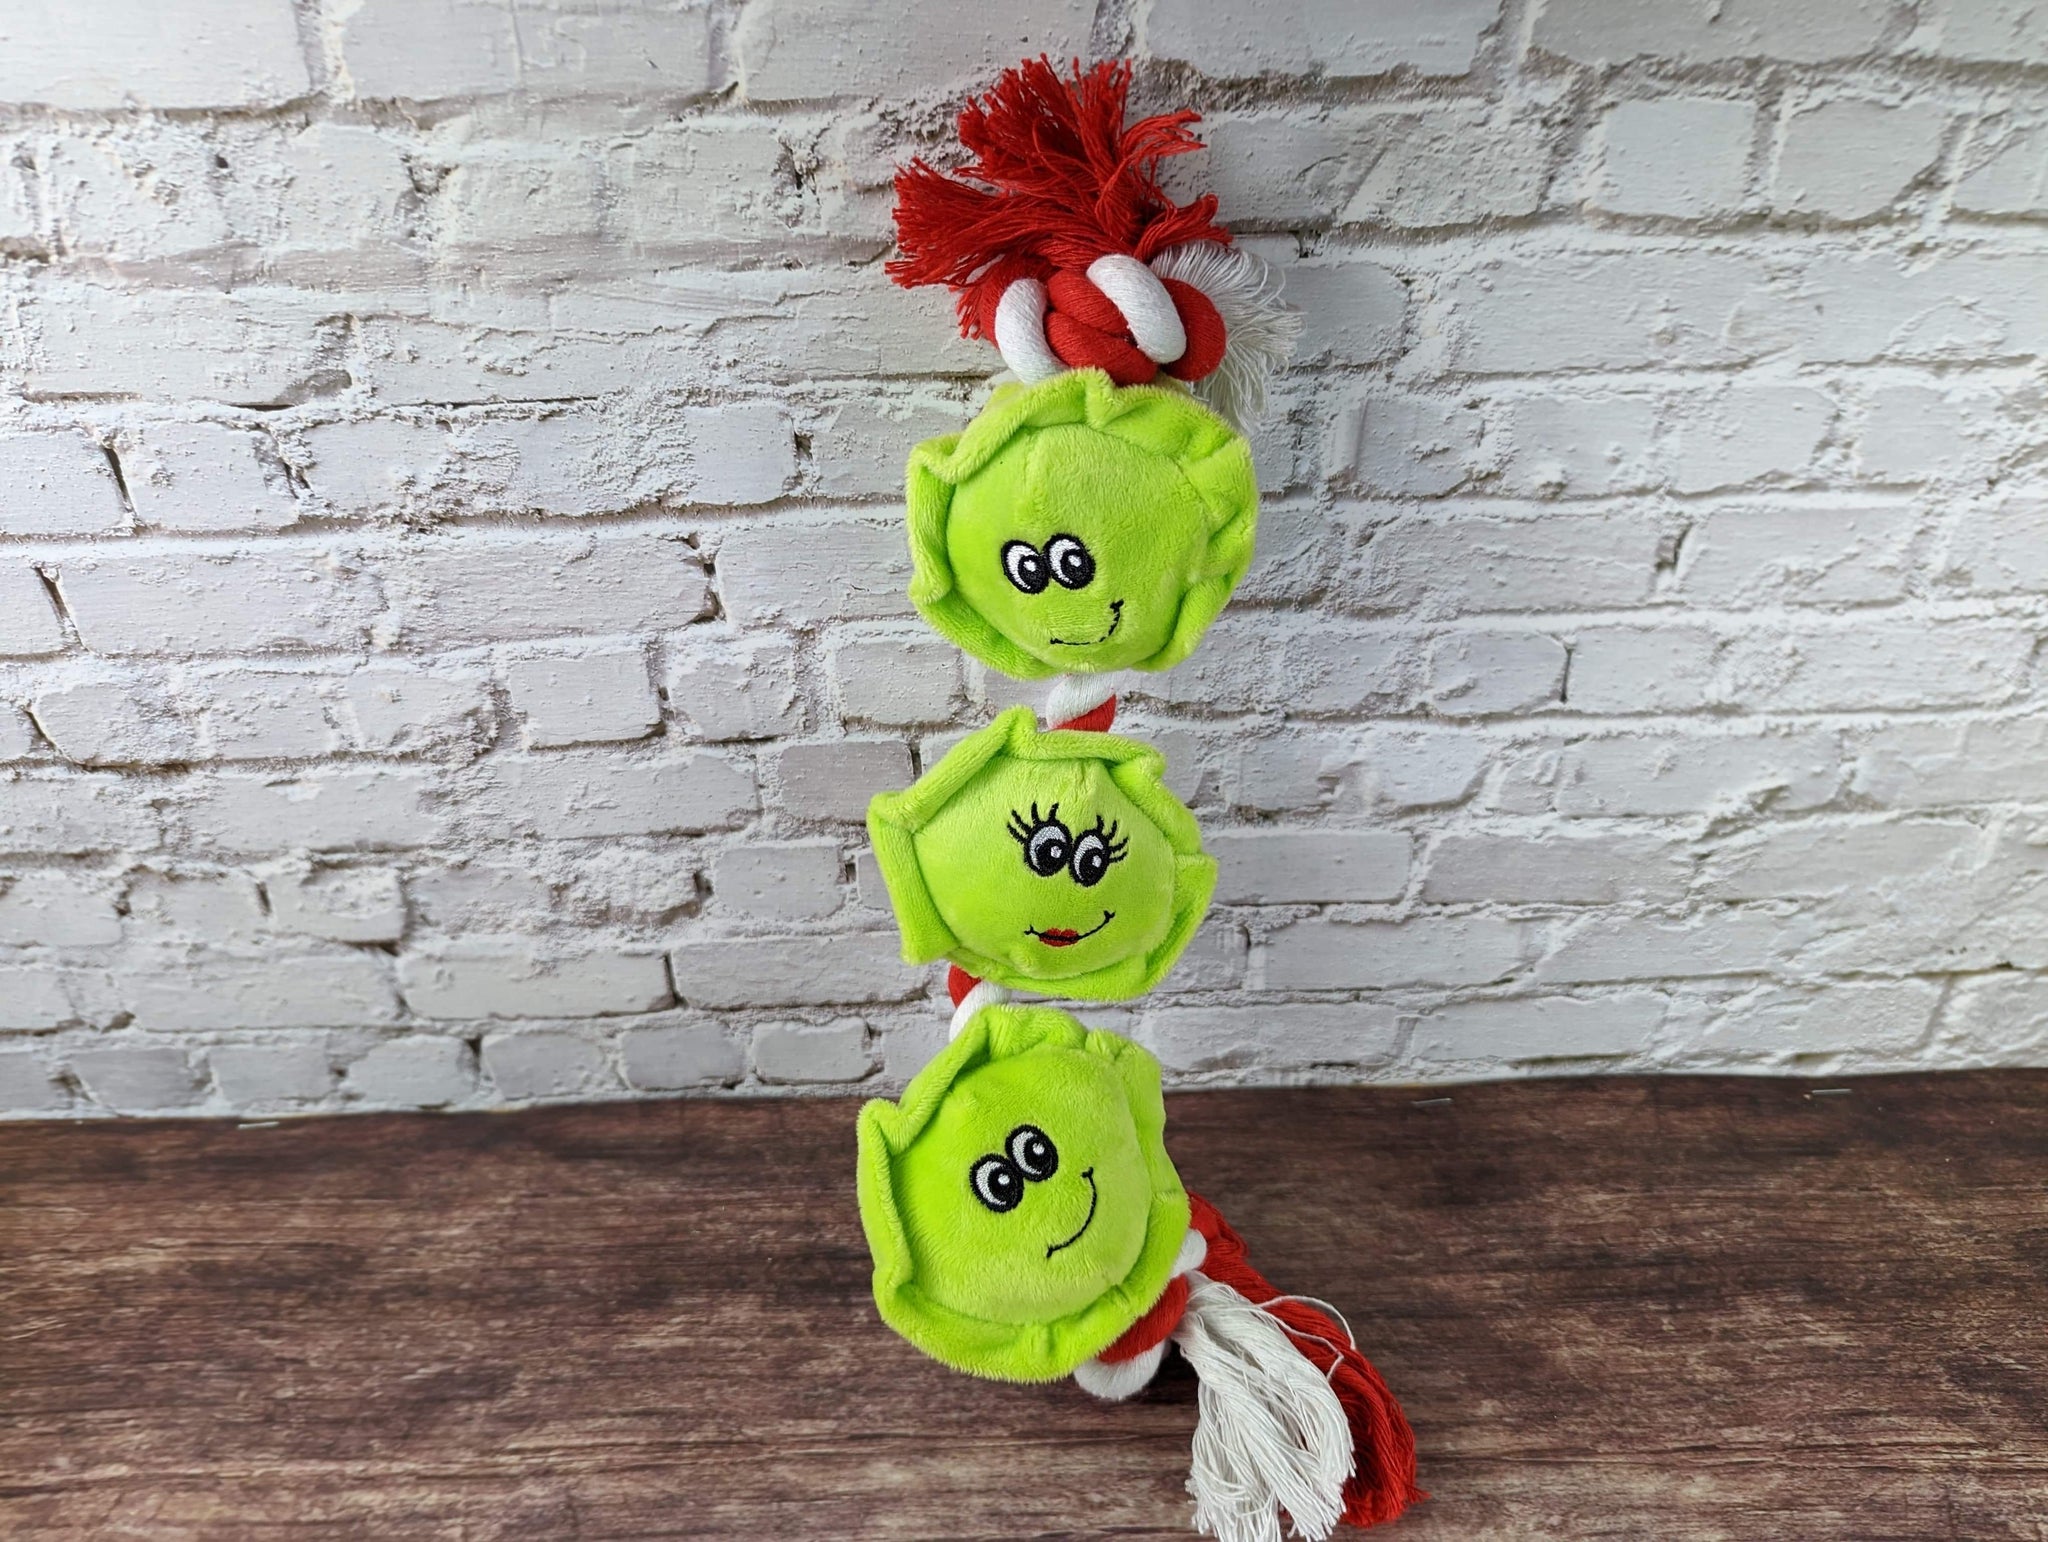 Sprouts rope toy set